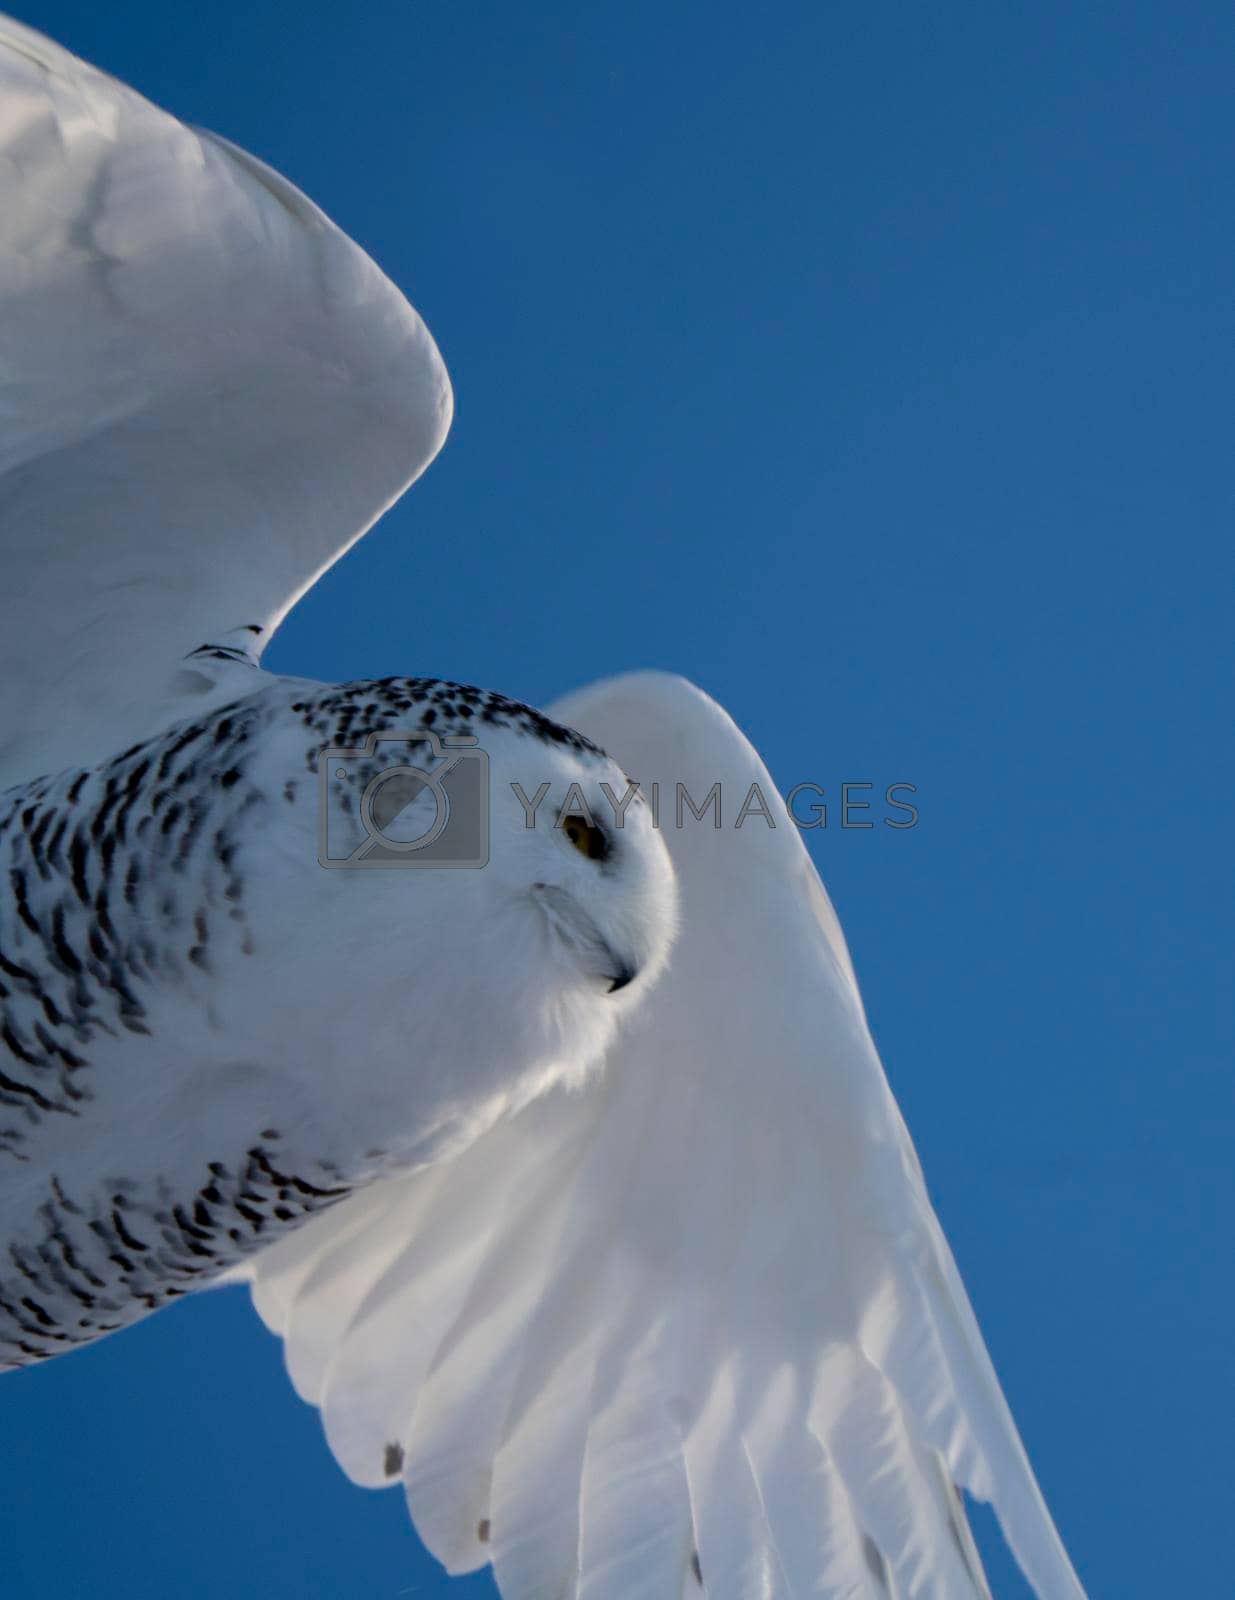 Royalty free image of Snowy Owl Canada by pictureguy